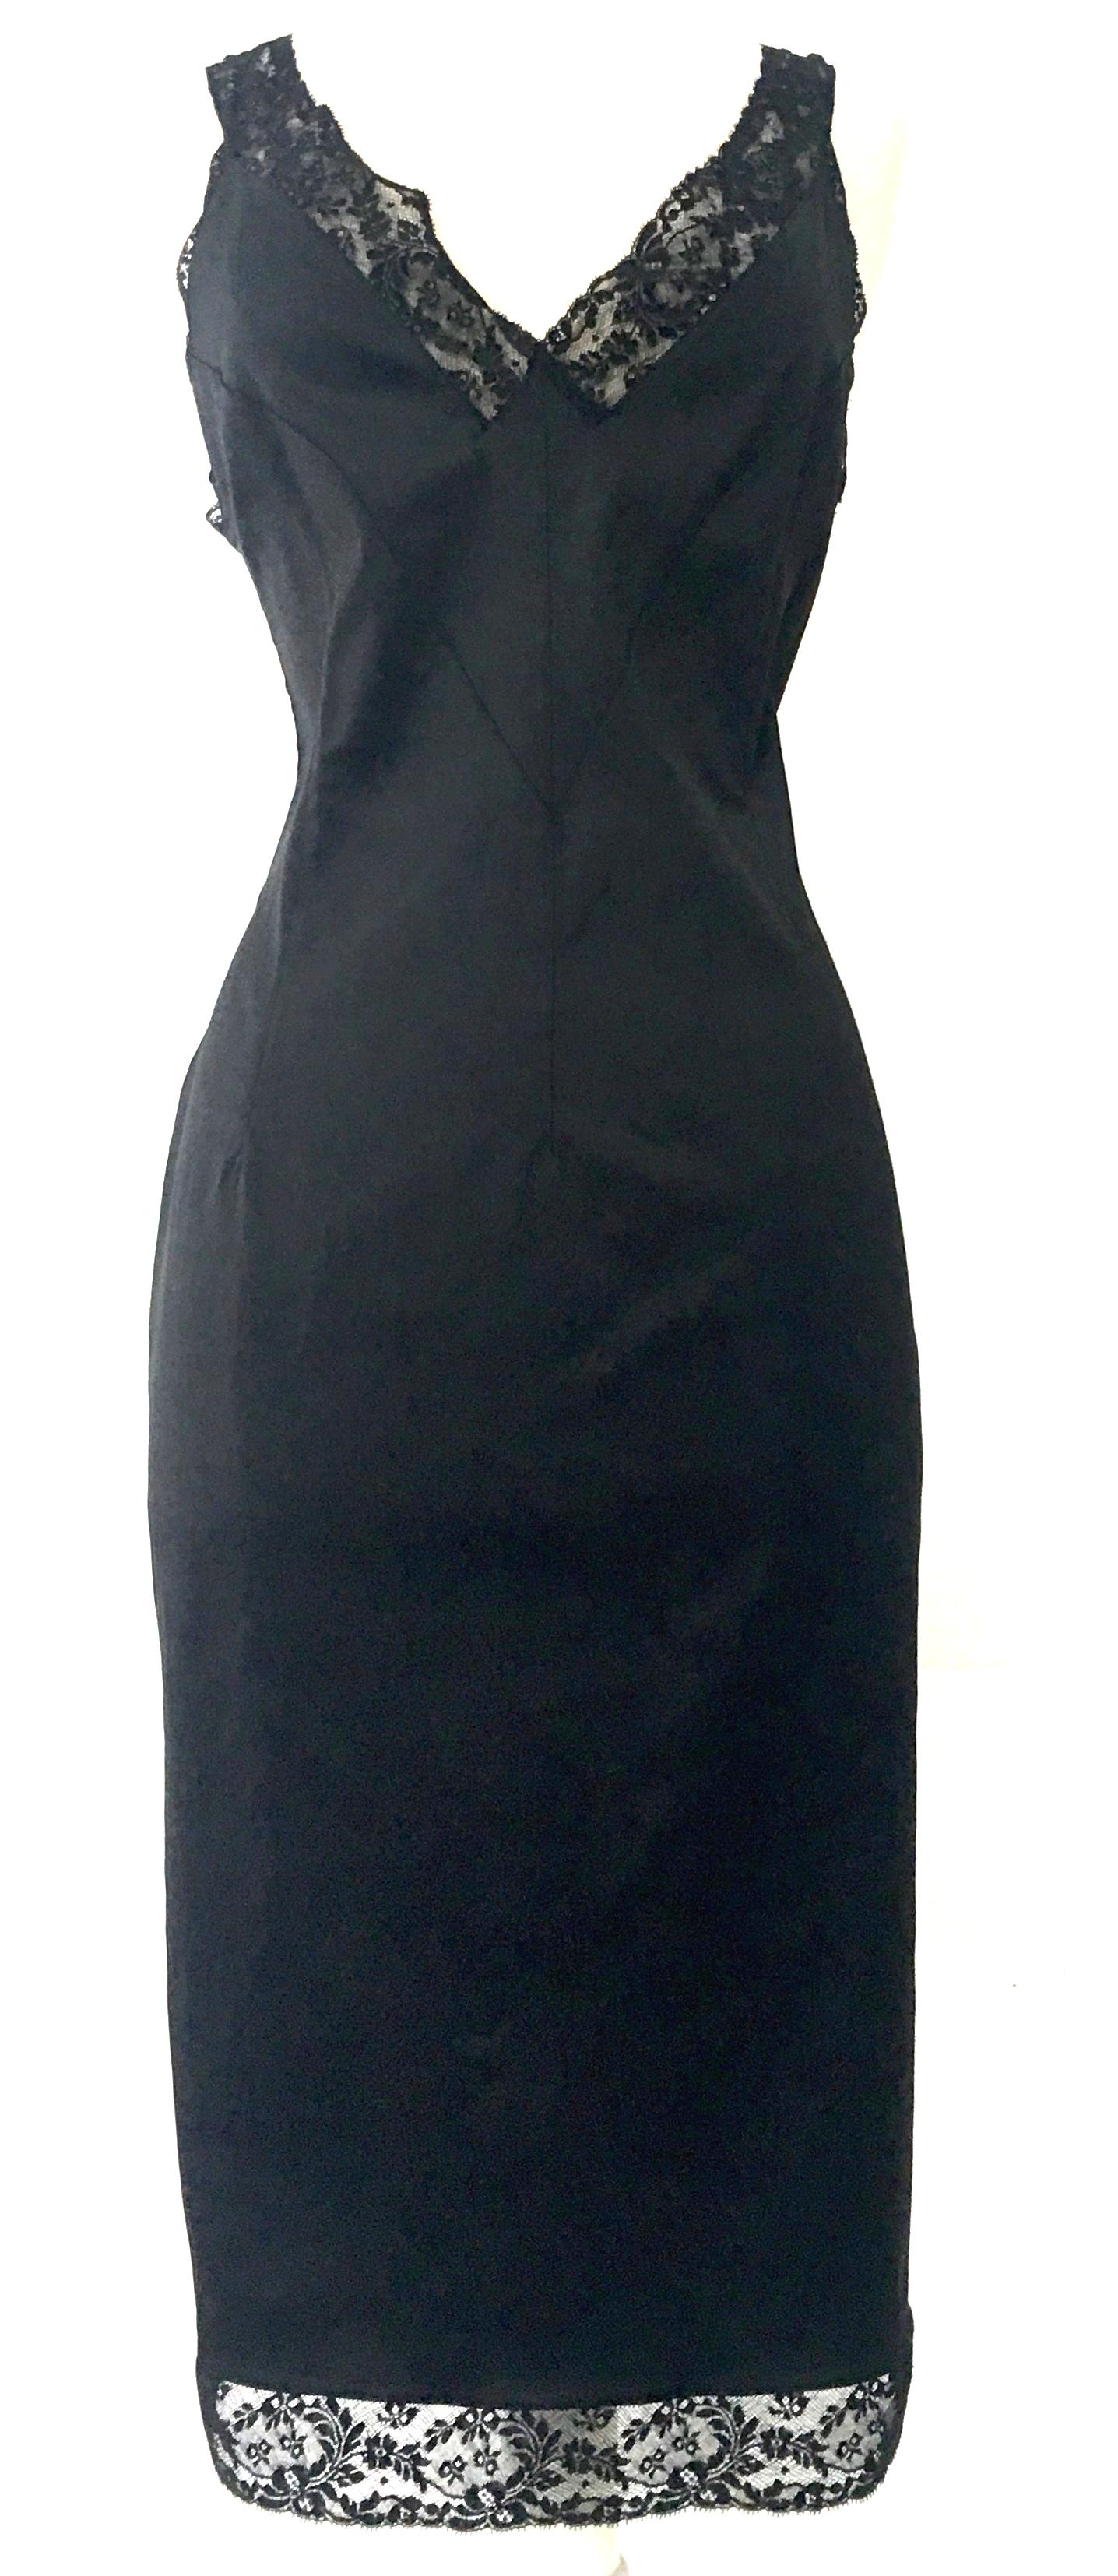 90'S Iconic Italian Dolce & Gabbana (D&G) Little Black Slip Style Dress. This forgiving form fitted stretch black 